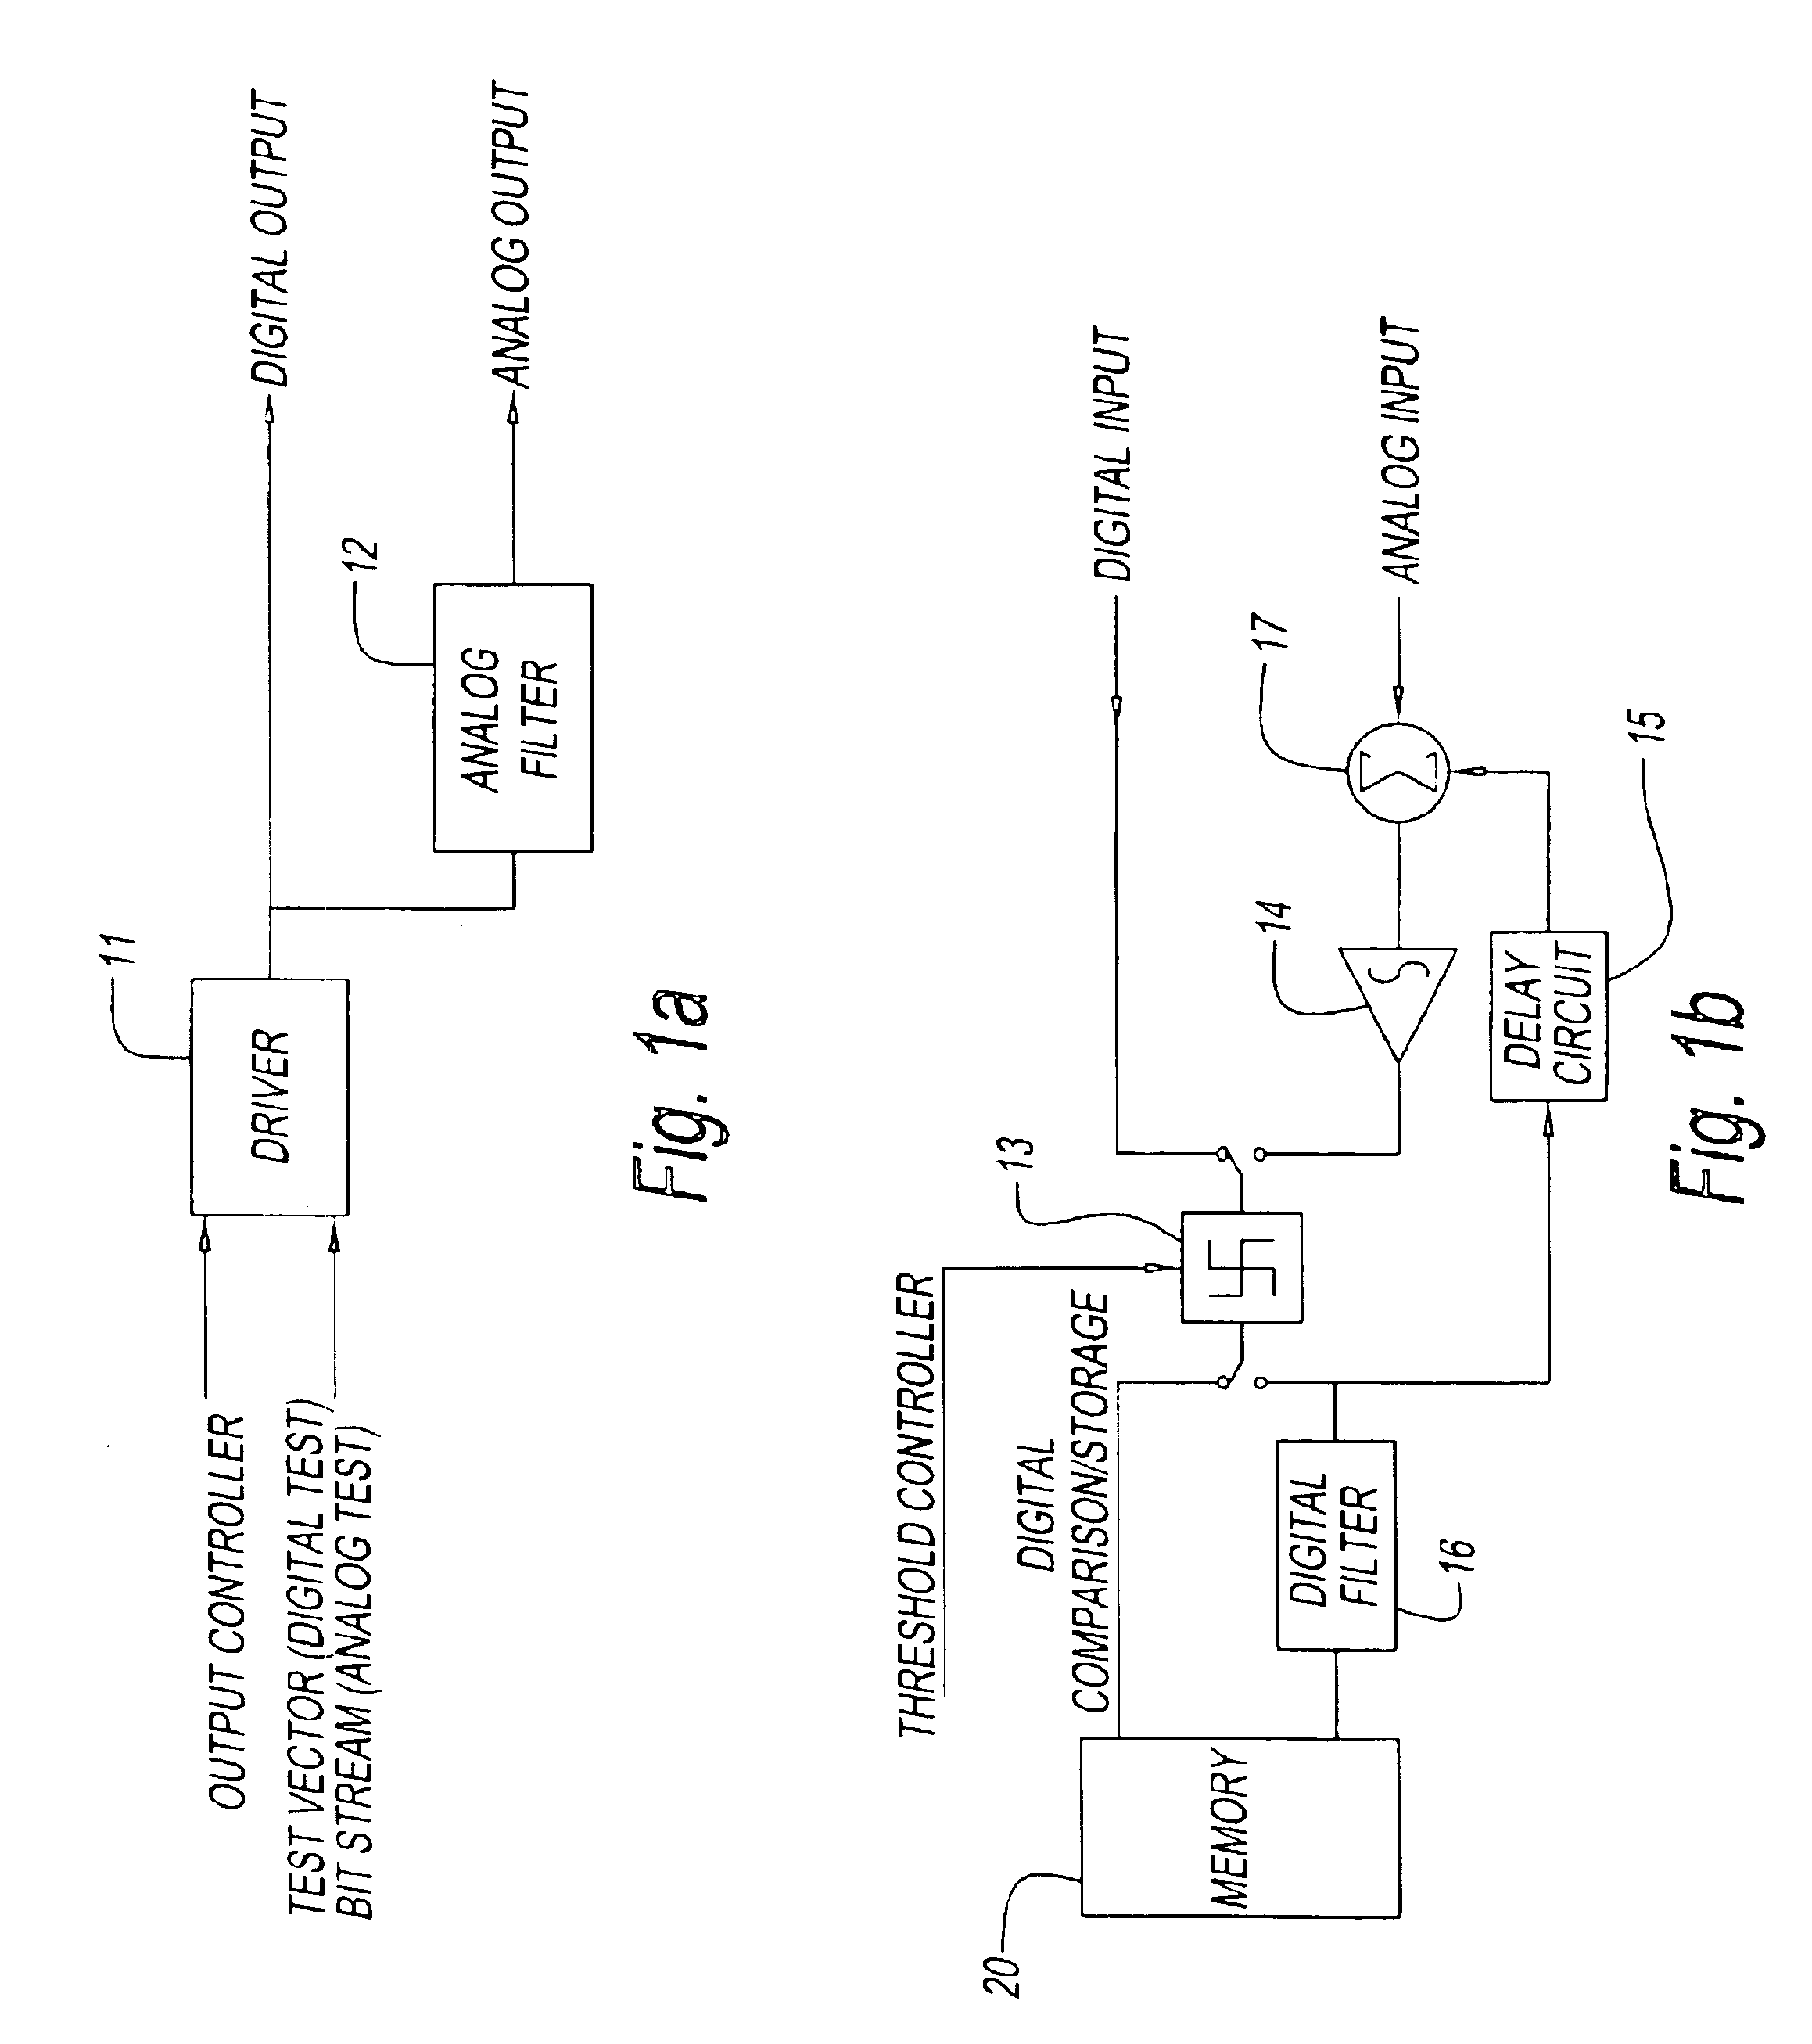 Apparatus for testing integrated circuits having an integrated unit for testing digital and analog signals